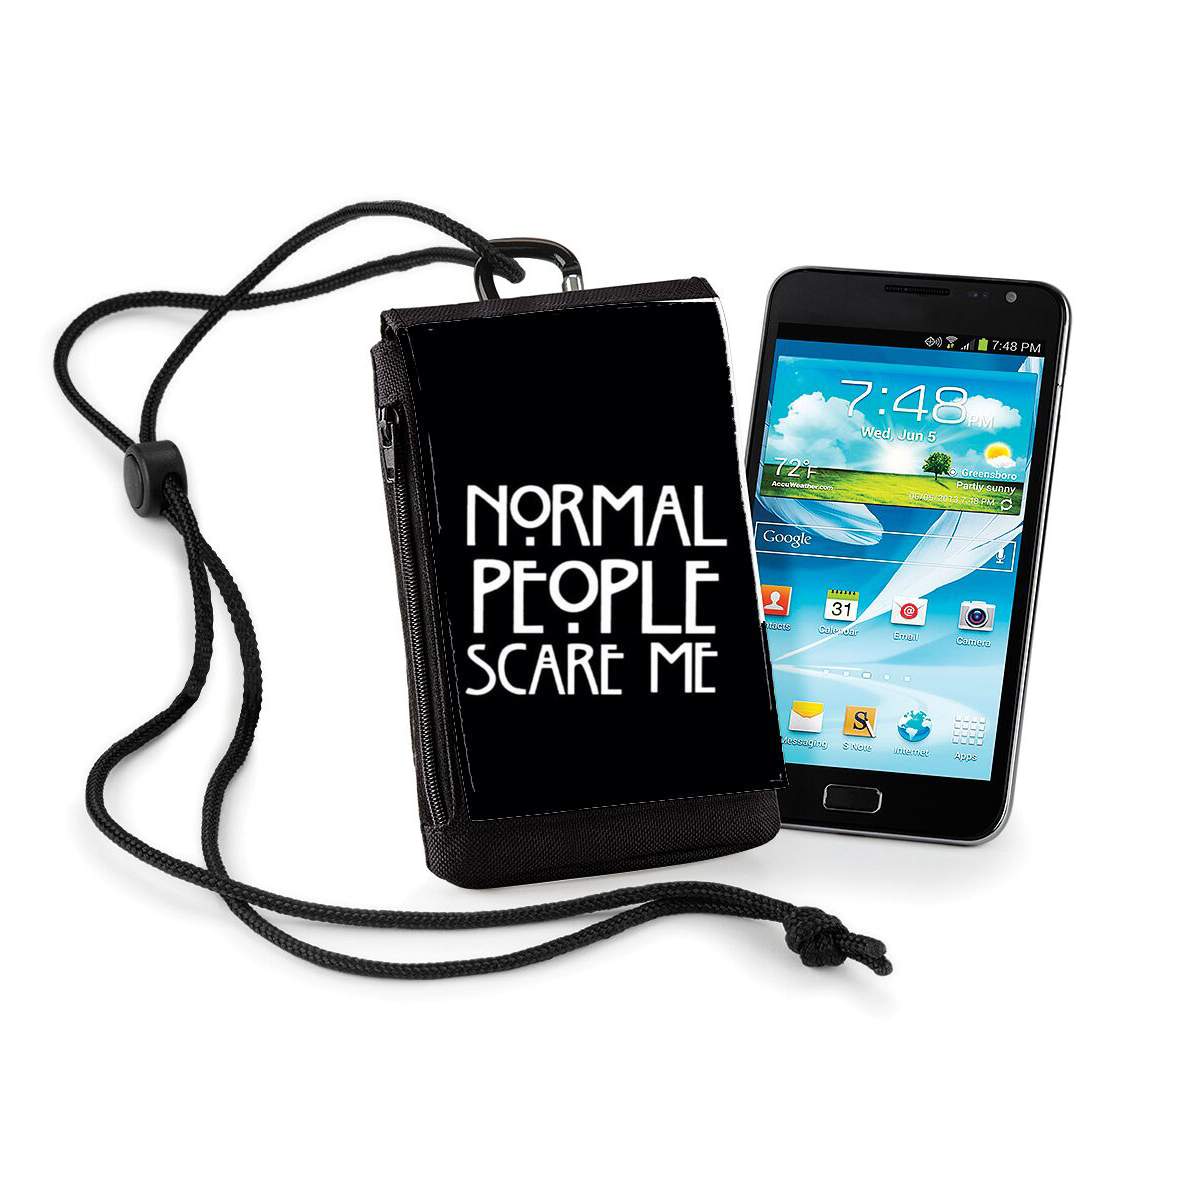 Coque American Horror Story Normal people scares me